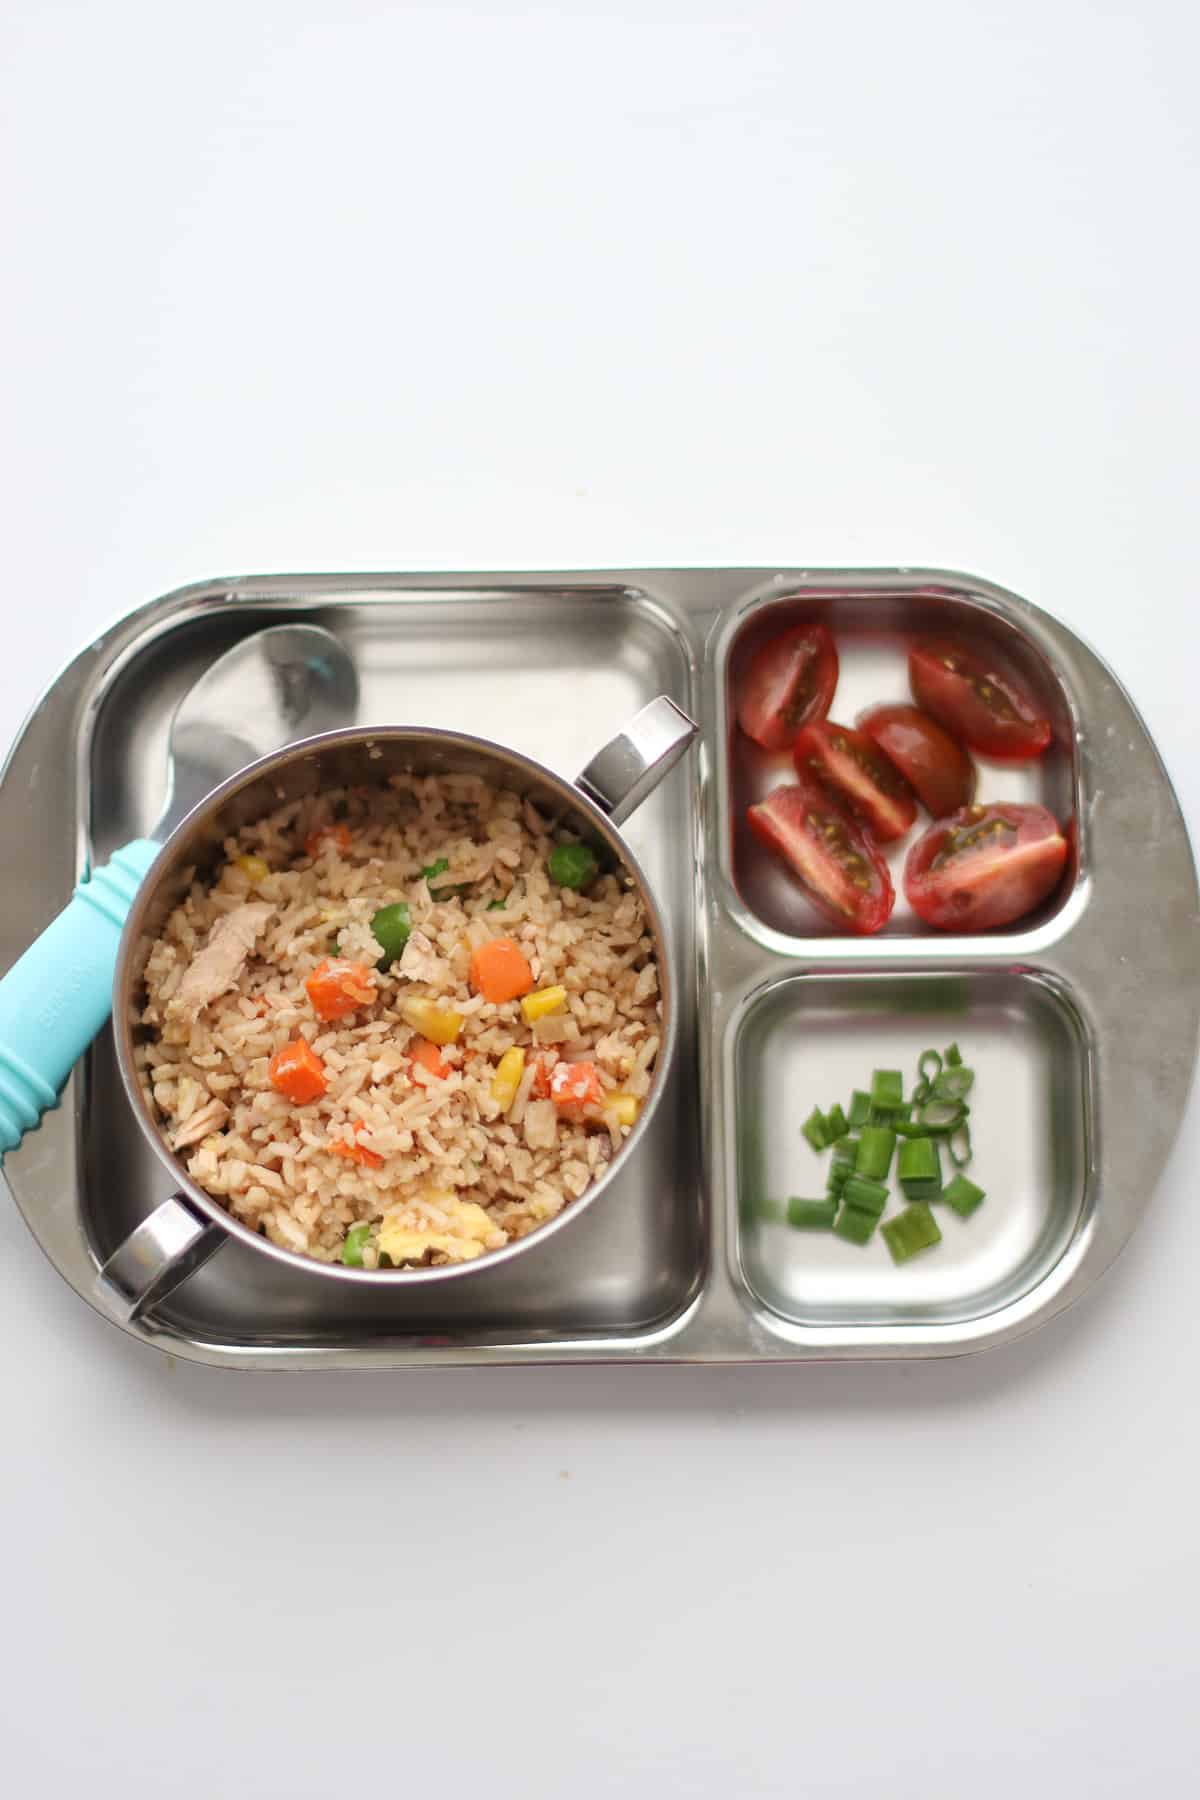 A toddler's stainless steel plate and bowl with rice and a side of quartered cherry tomatoes and chopped green onion.